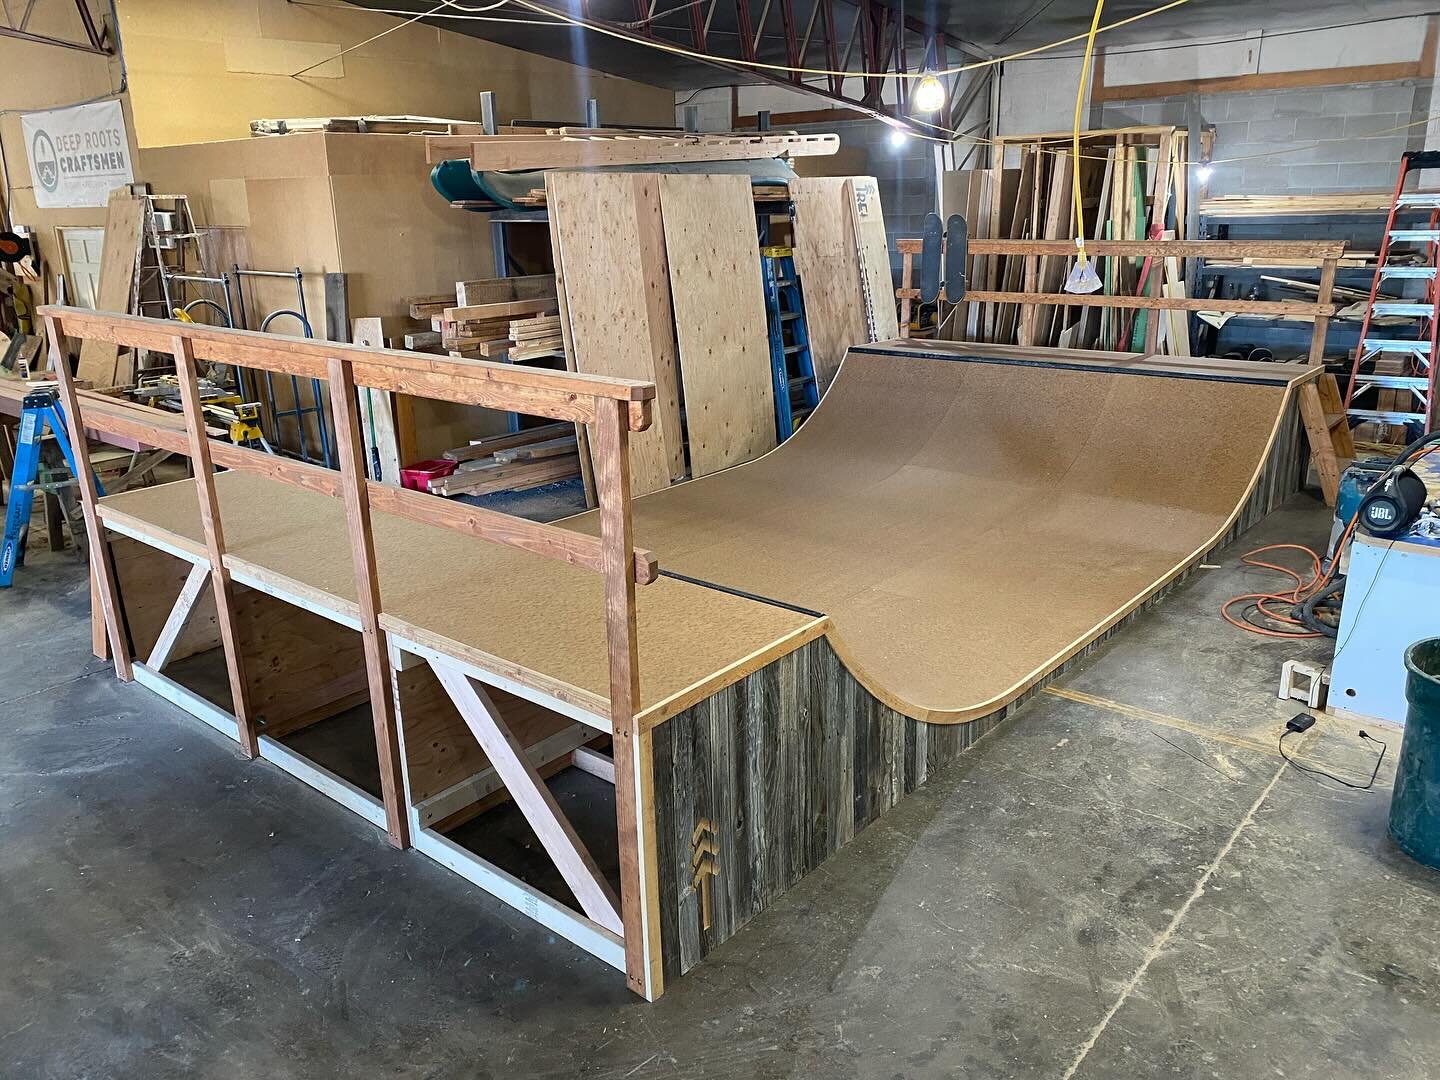 The skate ramp we built is still for sale!  It is currently broken down and ready to ship, waiting patiently under tarps in our yard.  We are reducing the price to $14,500!  Get this puppy set up in your backyard and make your kids&rsquo; (or your!) 